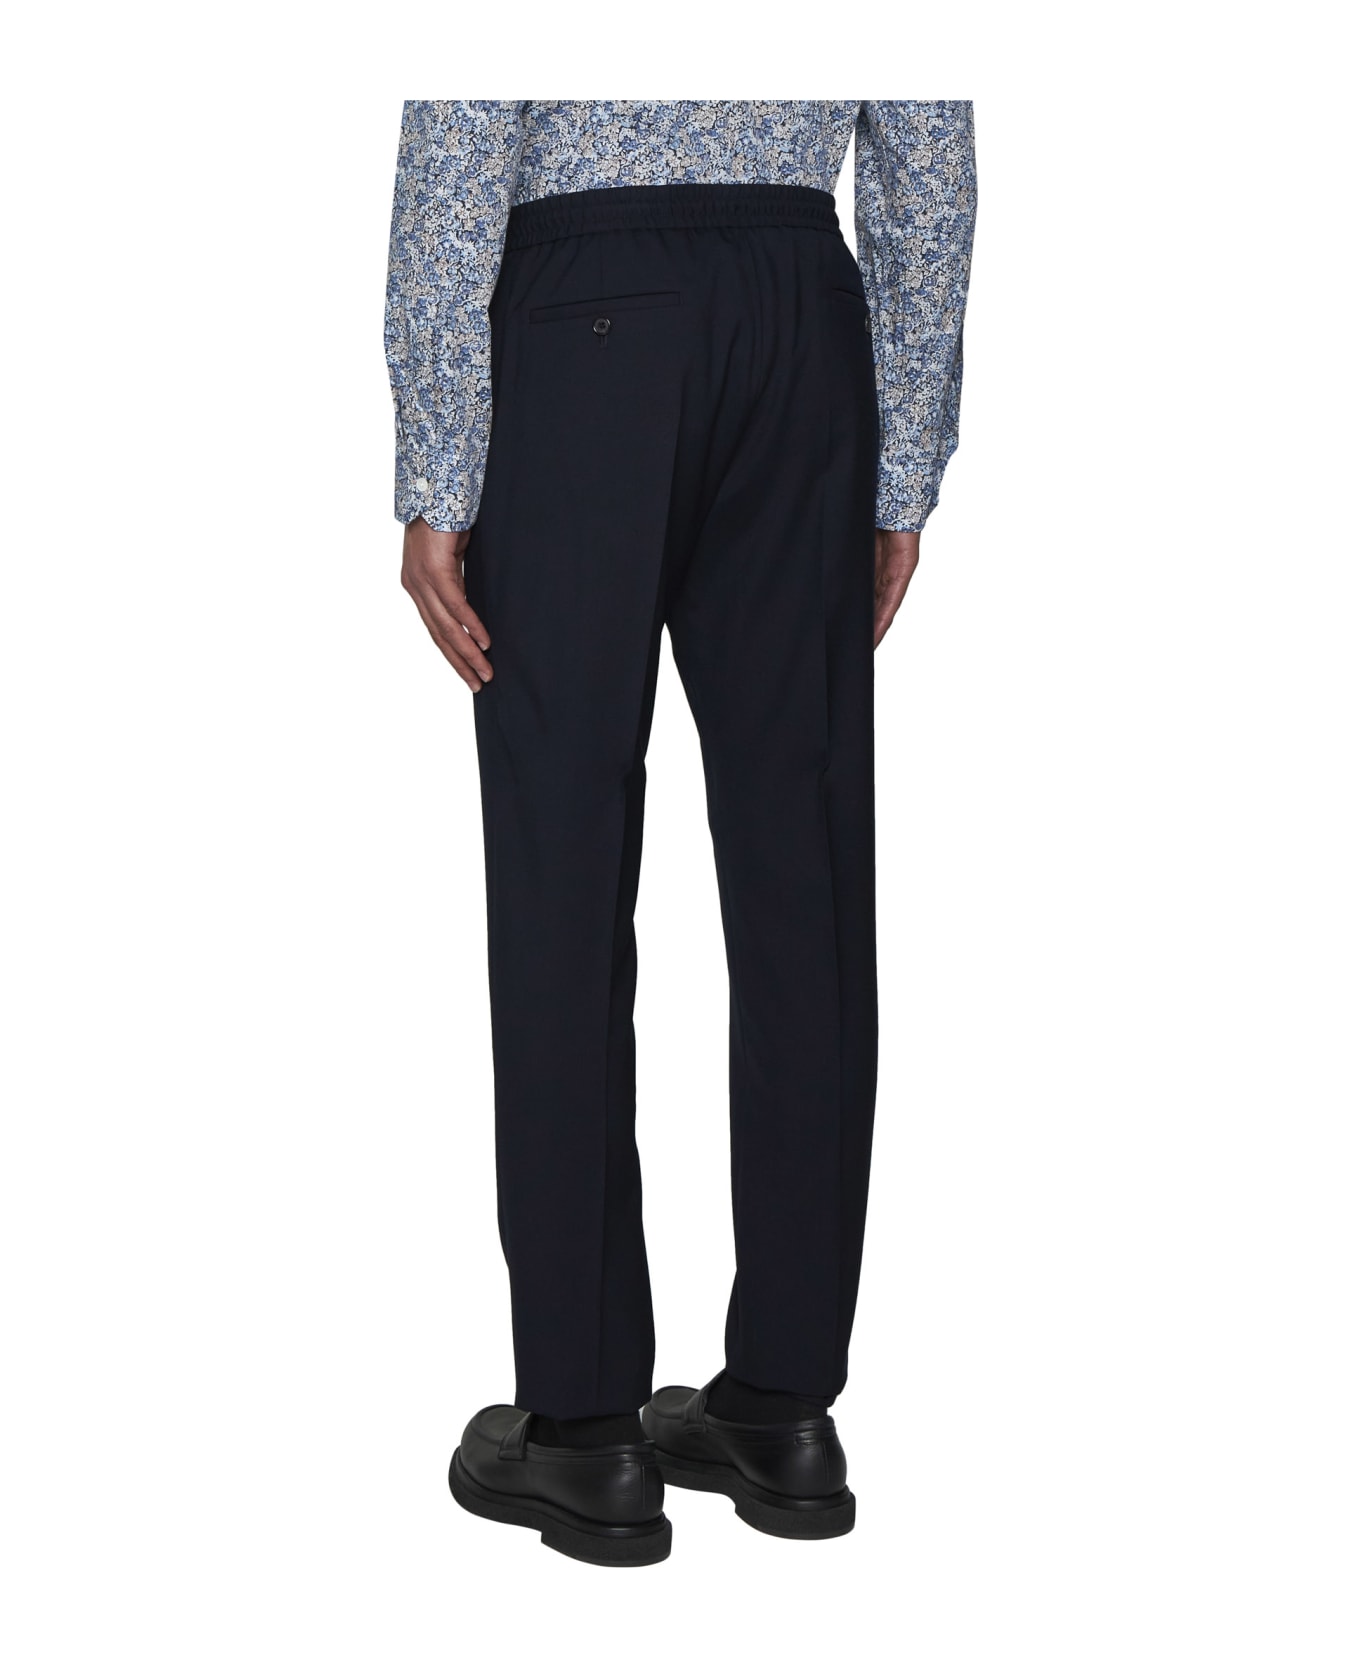 Paul Smith 'a Suit To Travel In' Wool Trousers - Dk na ボトムス